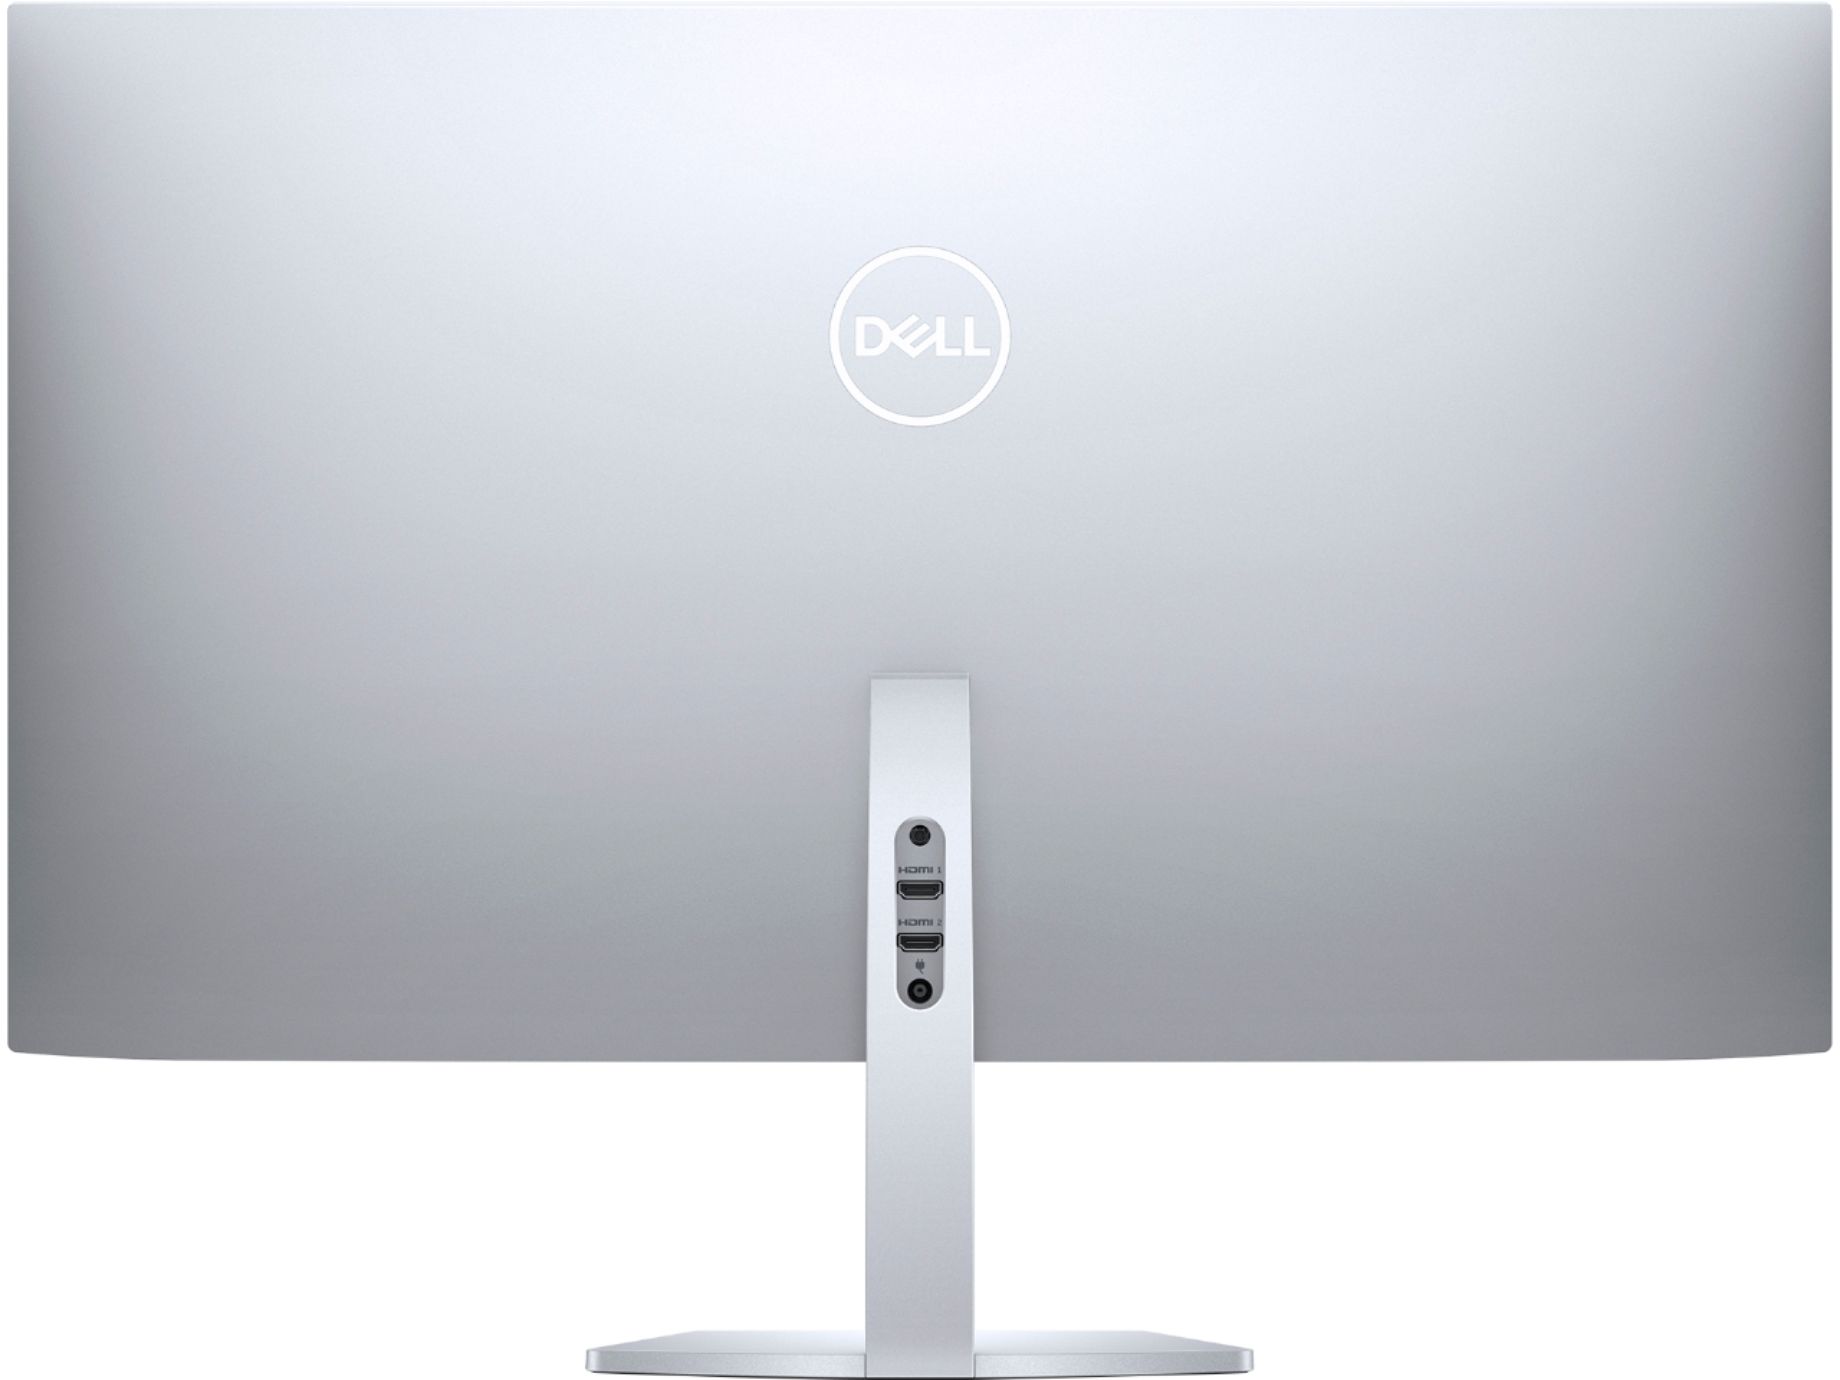 Back View: Dell - Geek Squad Certified Refurbished 27" IPS LED QHD Monitor with HDR